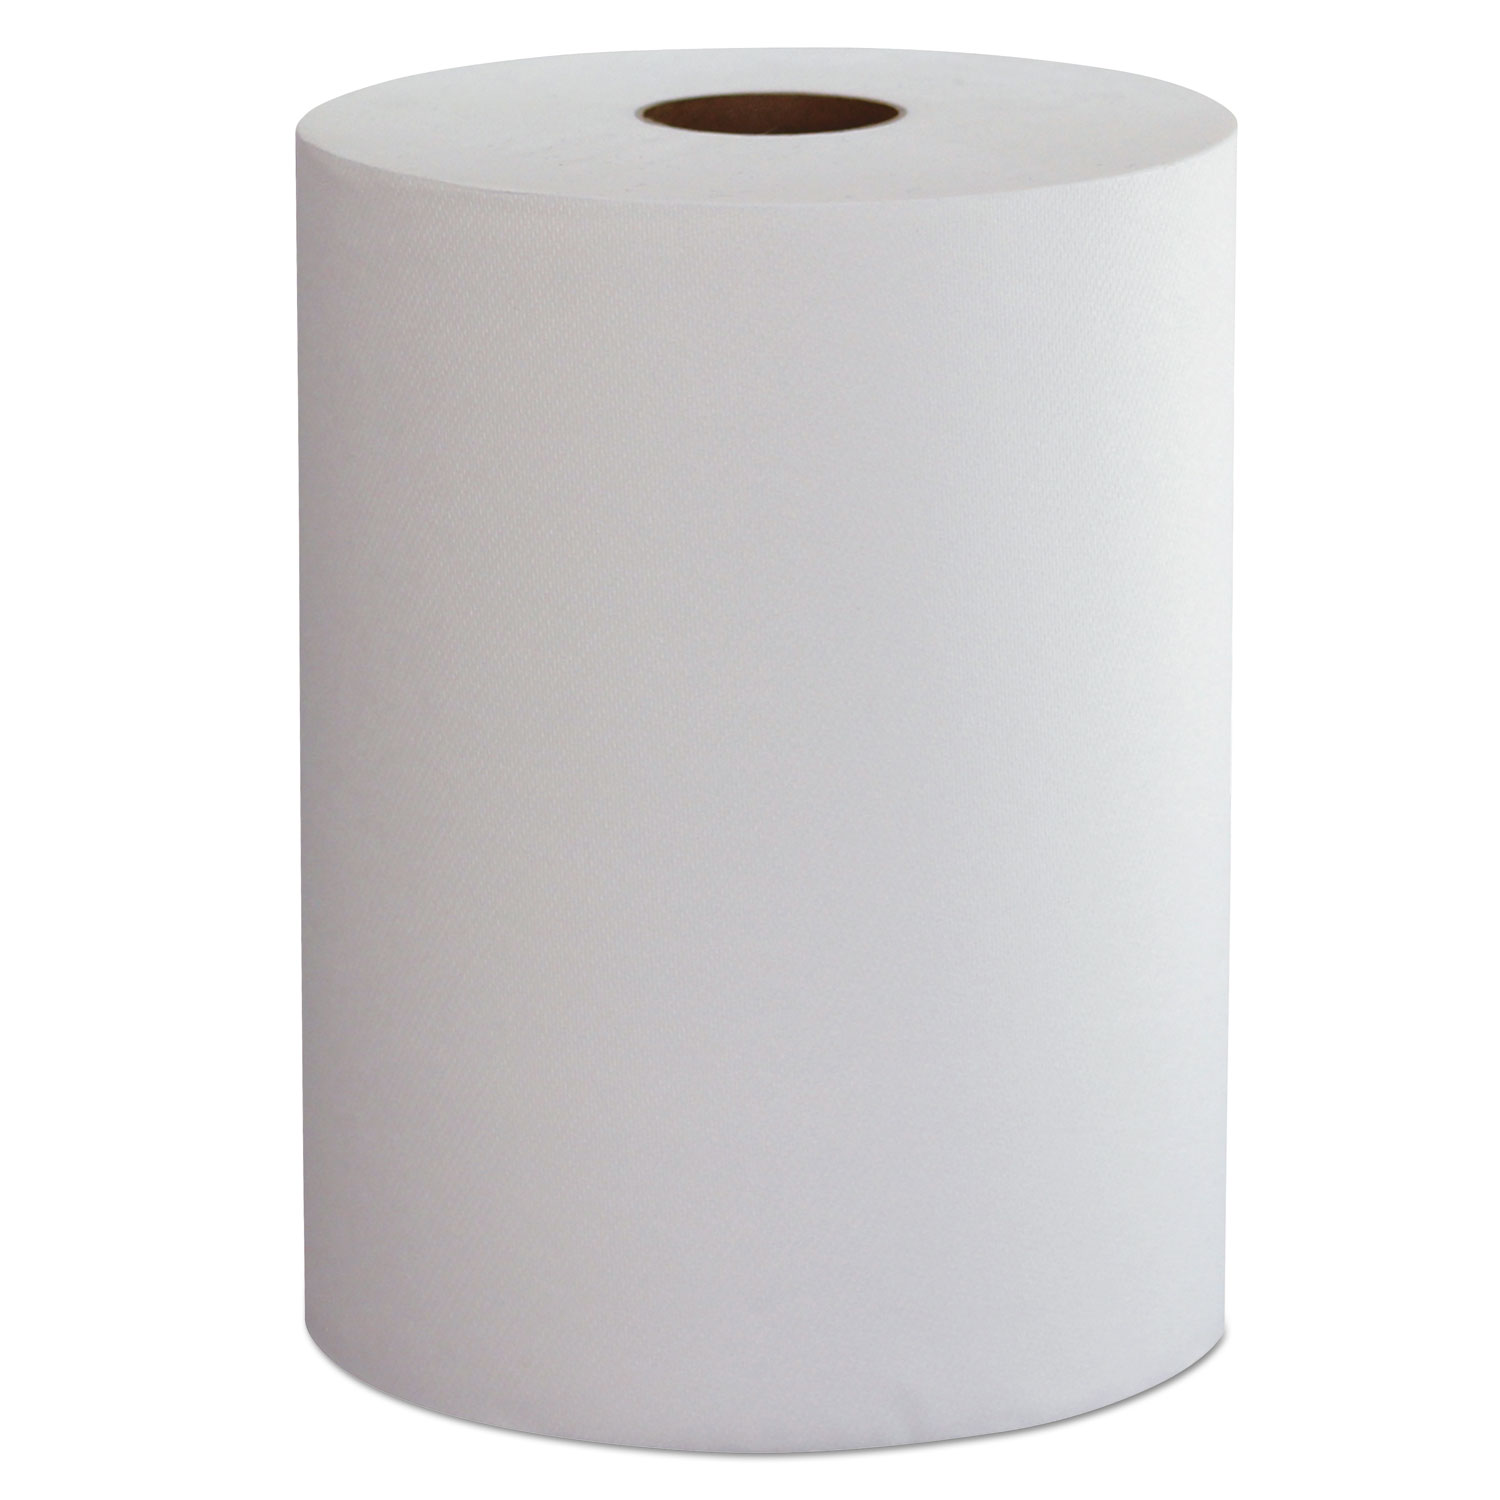 Morcon Hardwound Roll Towels - 1-Ply, 10